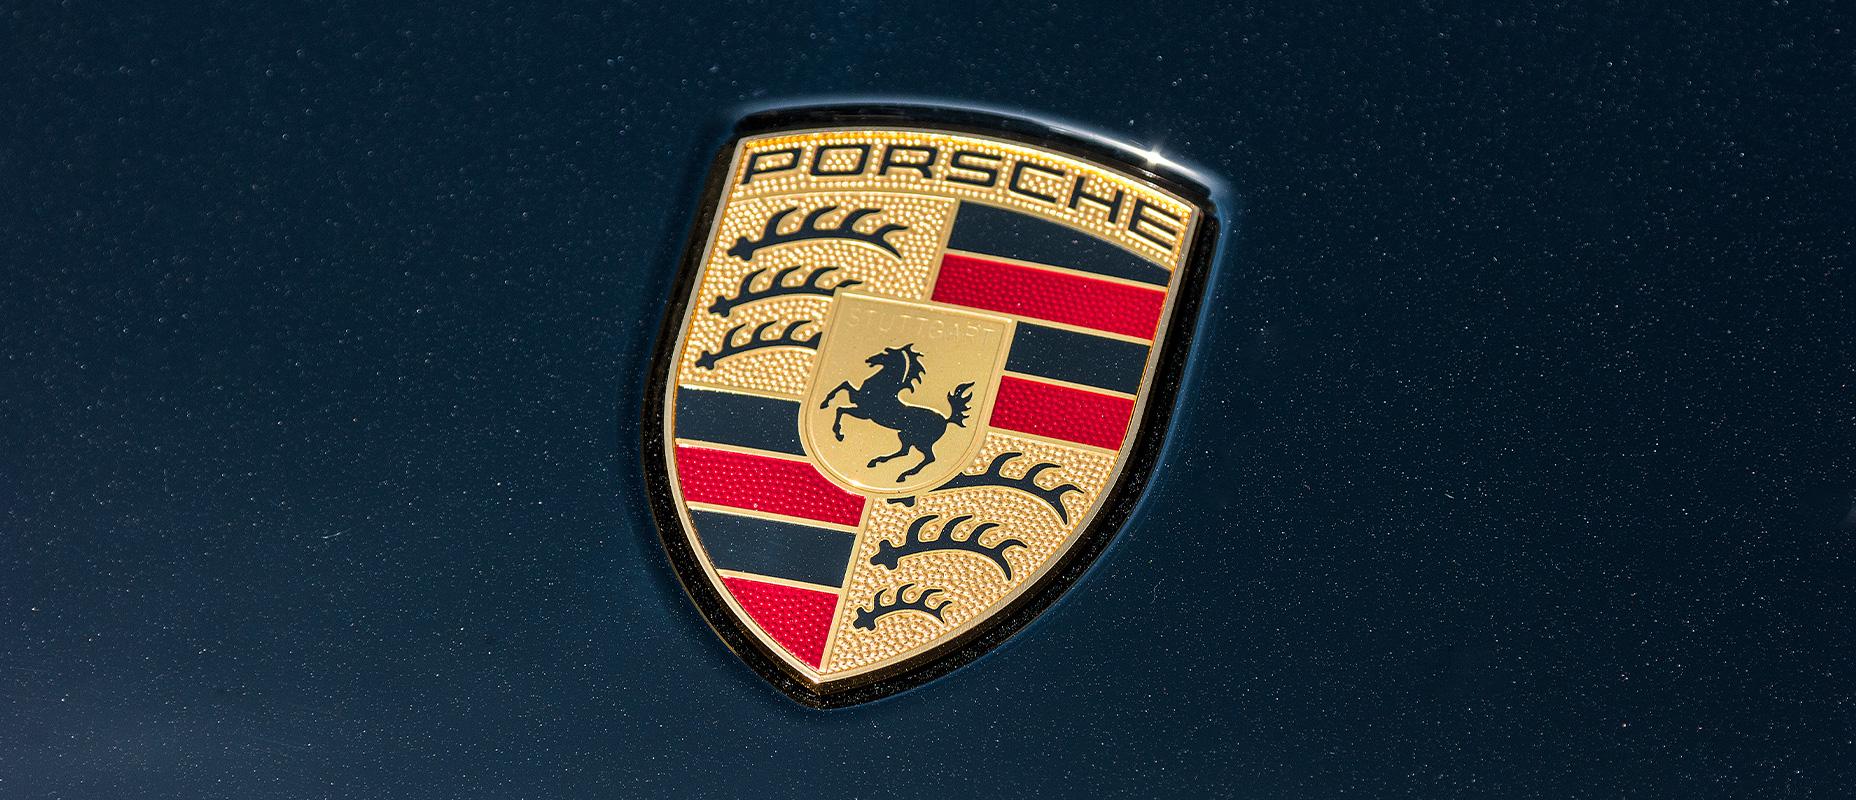 IPO of Porsche: VAG's Subsidiary Is Going Public